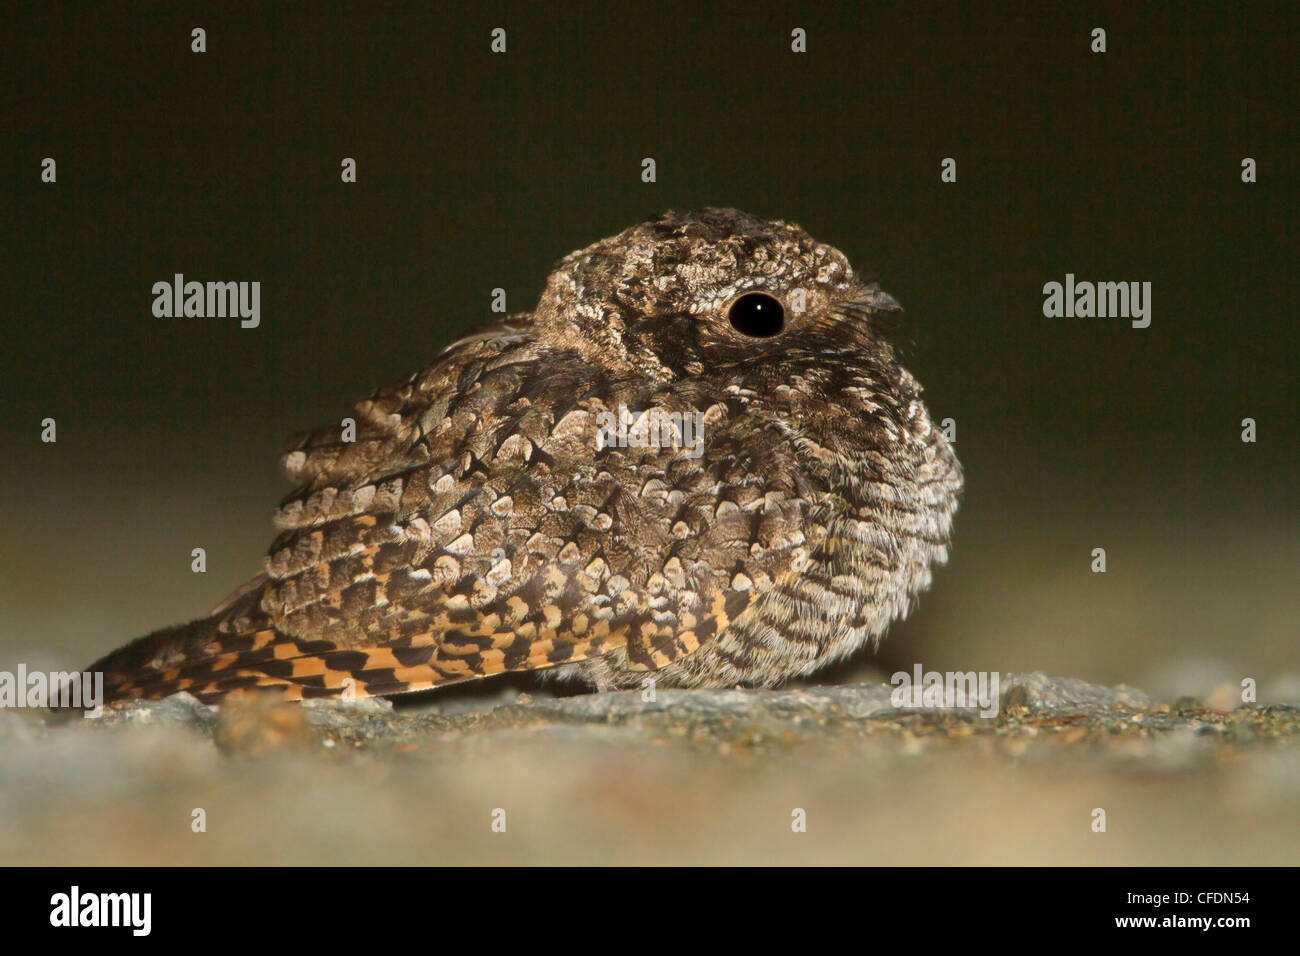 Common Poorwill (Phalaenoptilus nuttallii) perched on the ground in the Okanagan Valley, British Columbia, Canada. Stock Photo